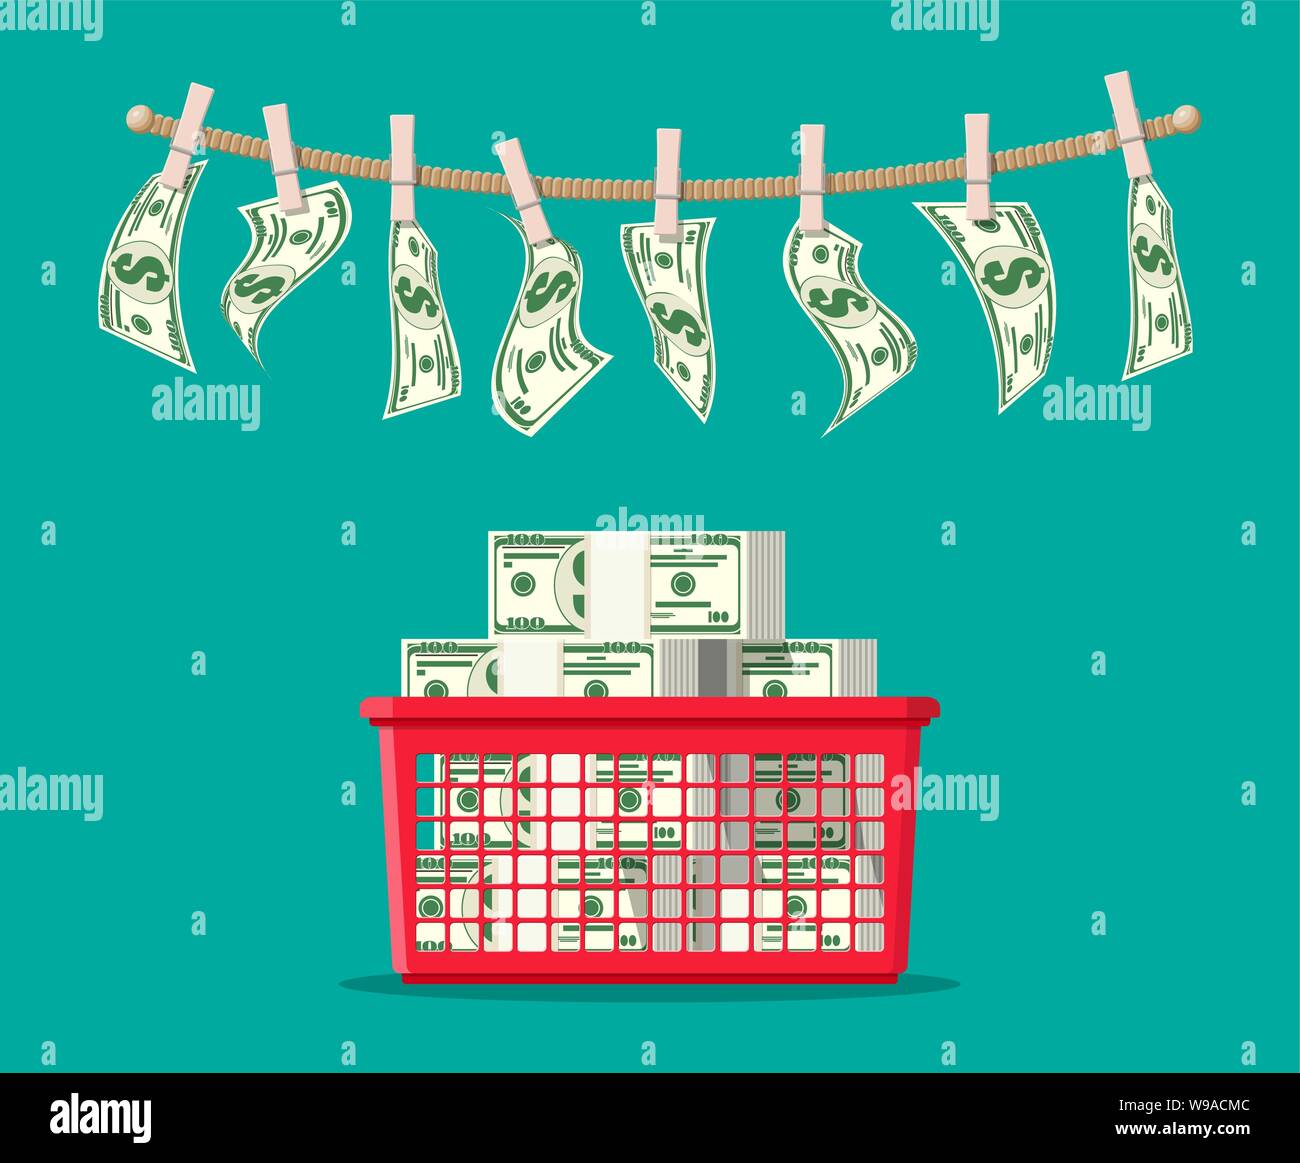 Wet dollar bills hanging on rope attached with clothes pins. Money laundering concept. Dirty money. Hidden wages, salaries black payments, tax evasion, bribe. Anti corruption. Flat vector illustration Stock Vector